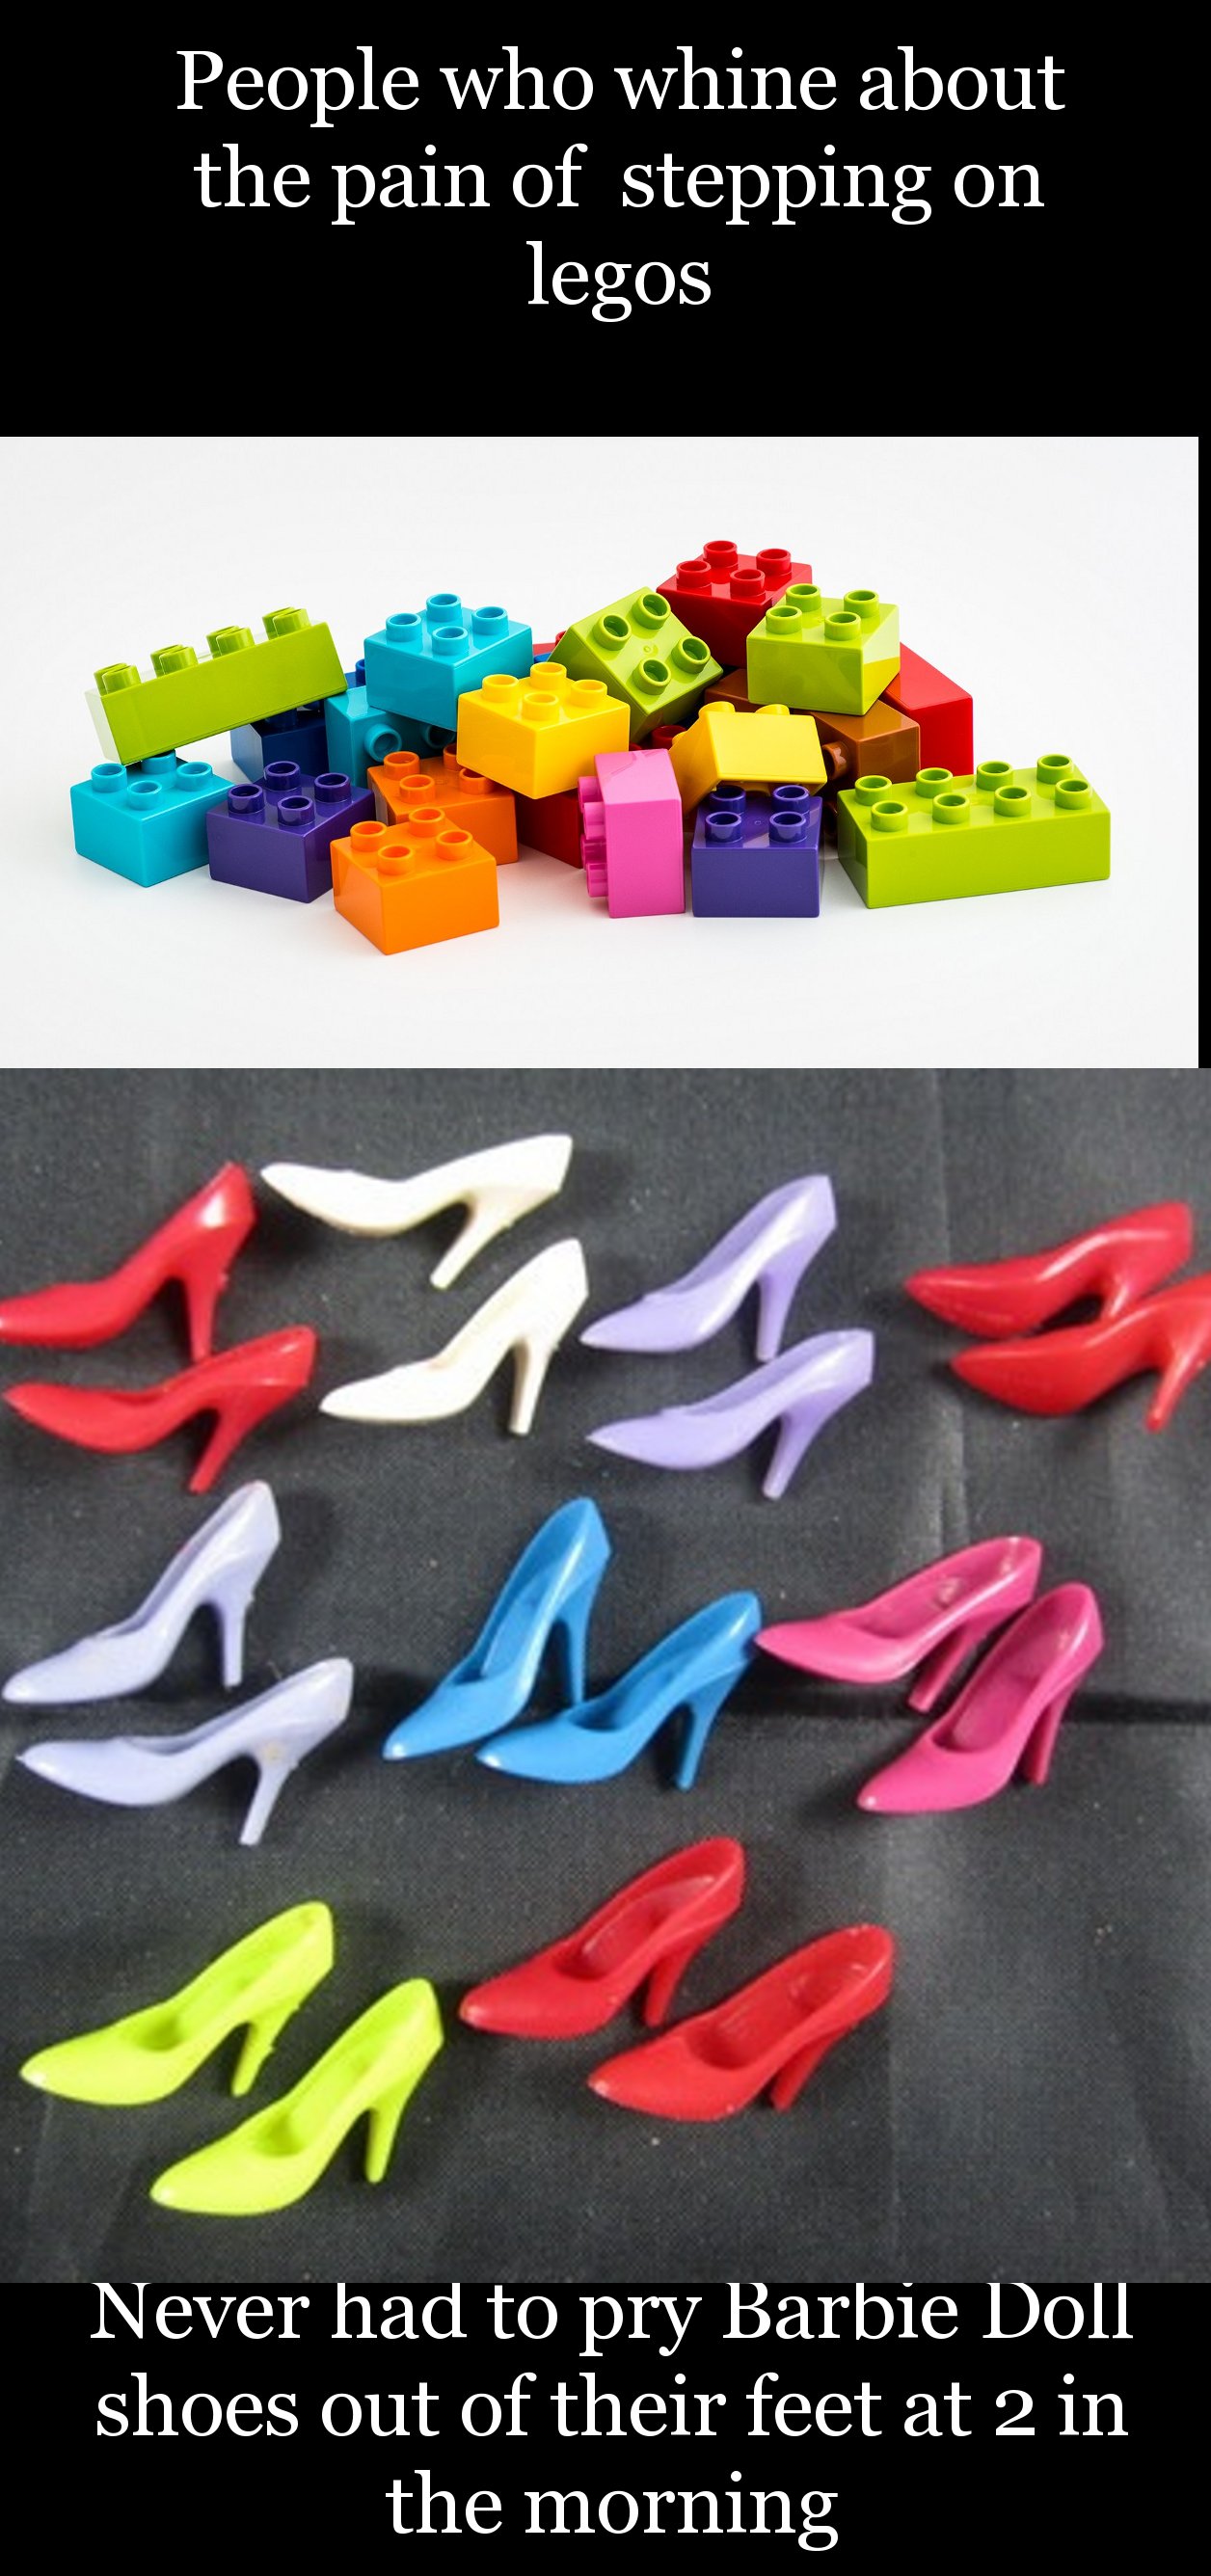 fashion accessory - People who whine about the pain of stepping on legos Never had to pry Barbie Doll shoes out of their feet at 2 in the morning